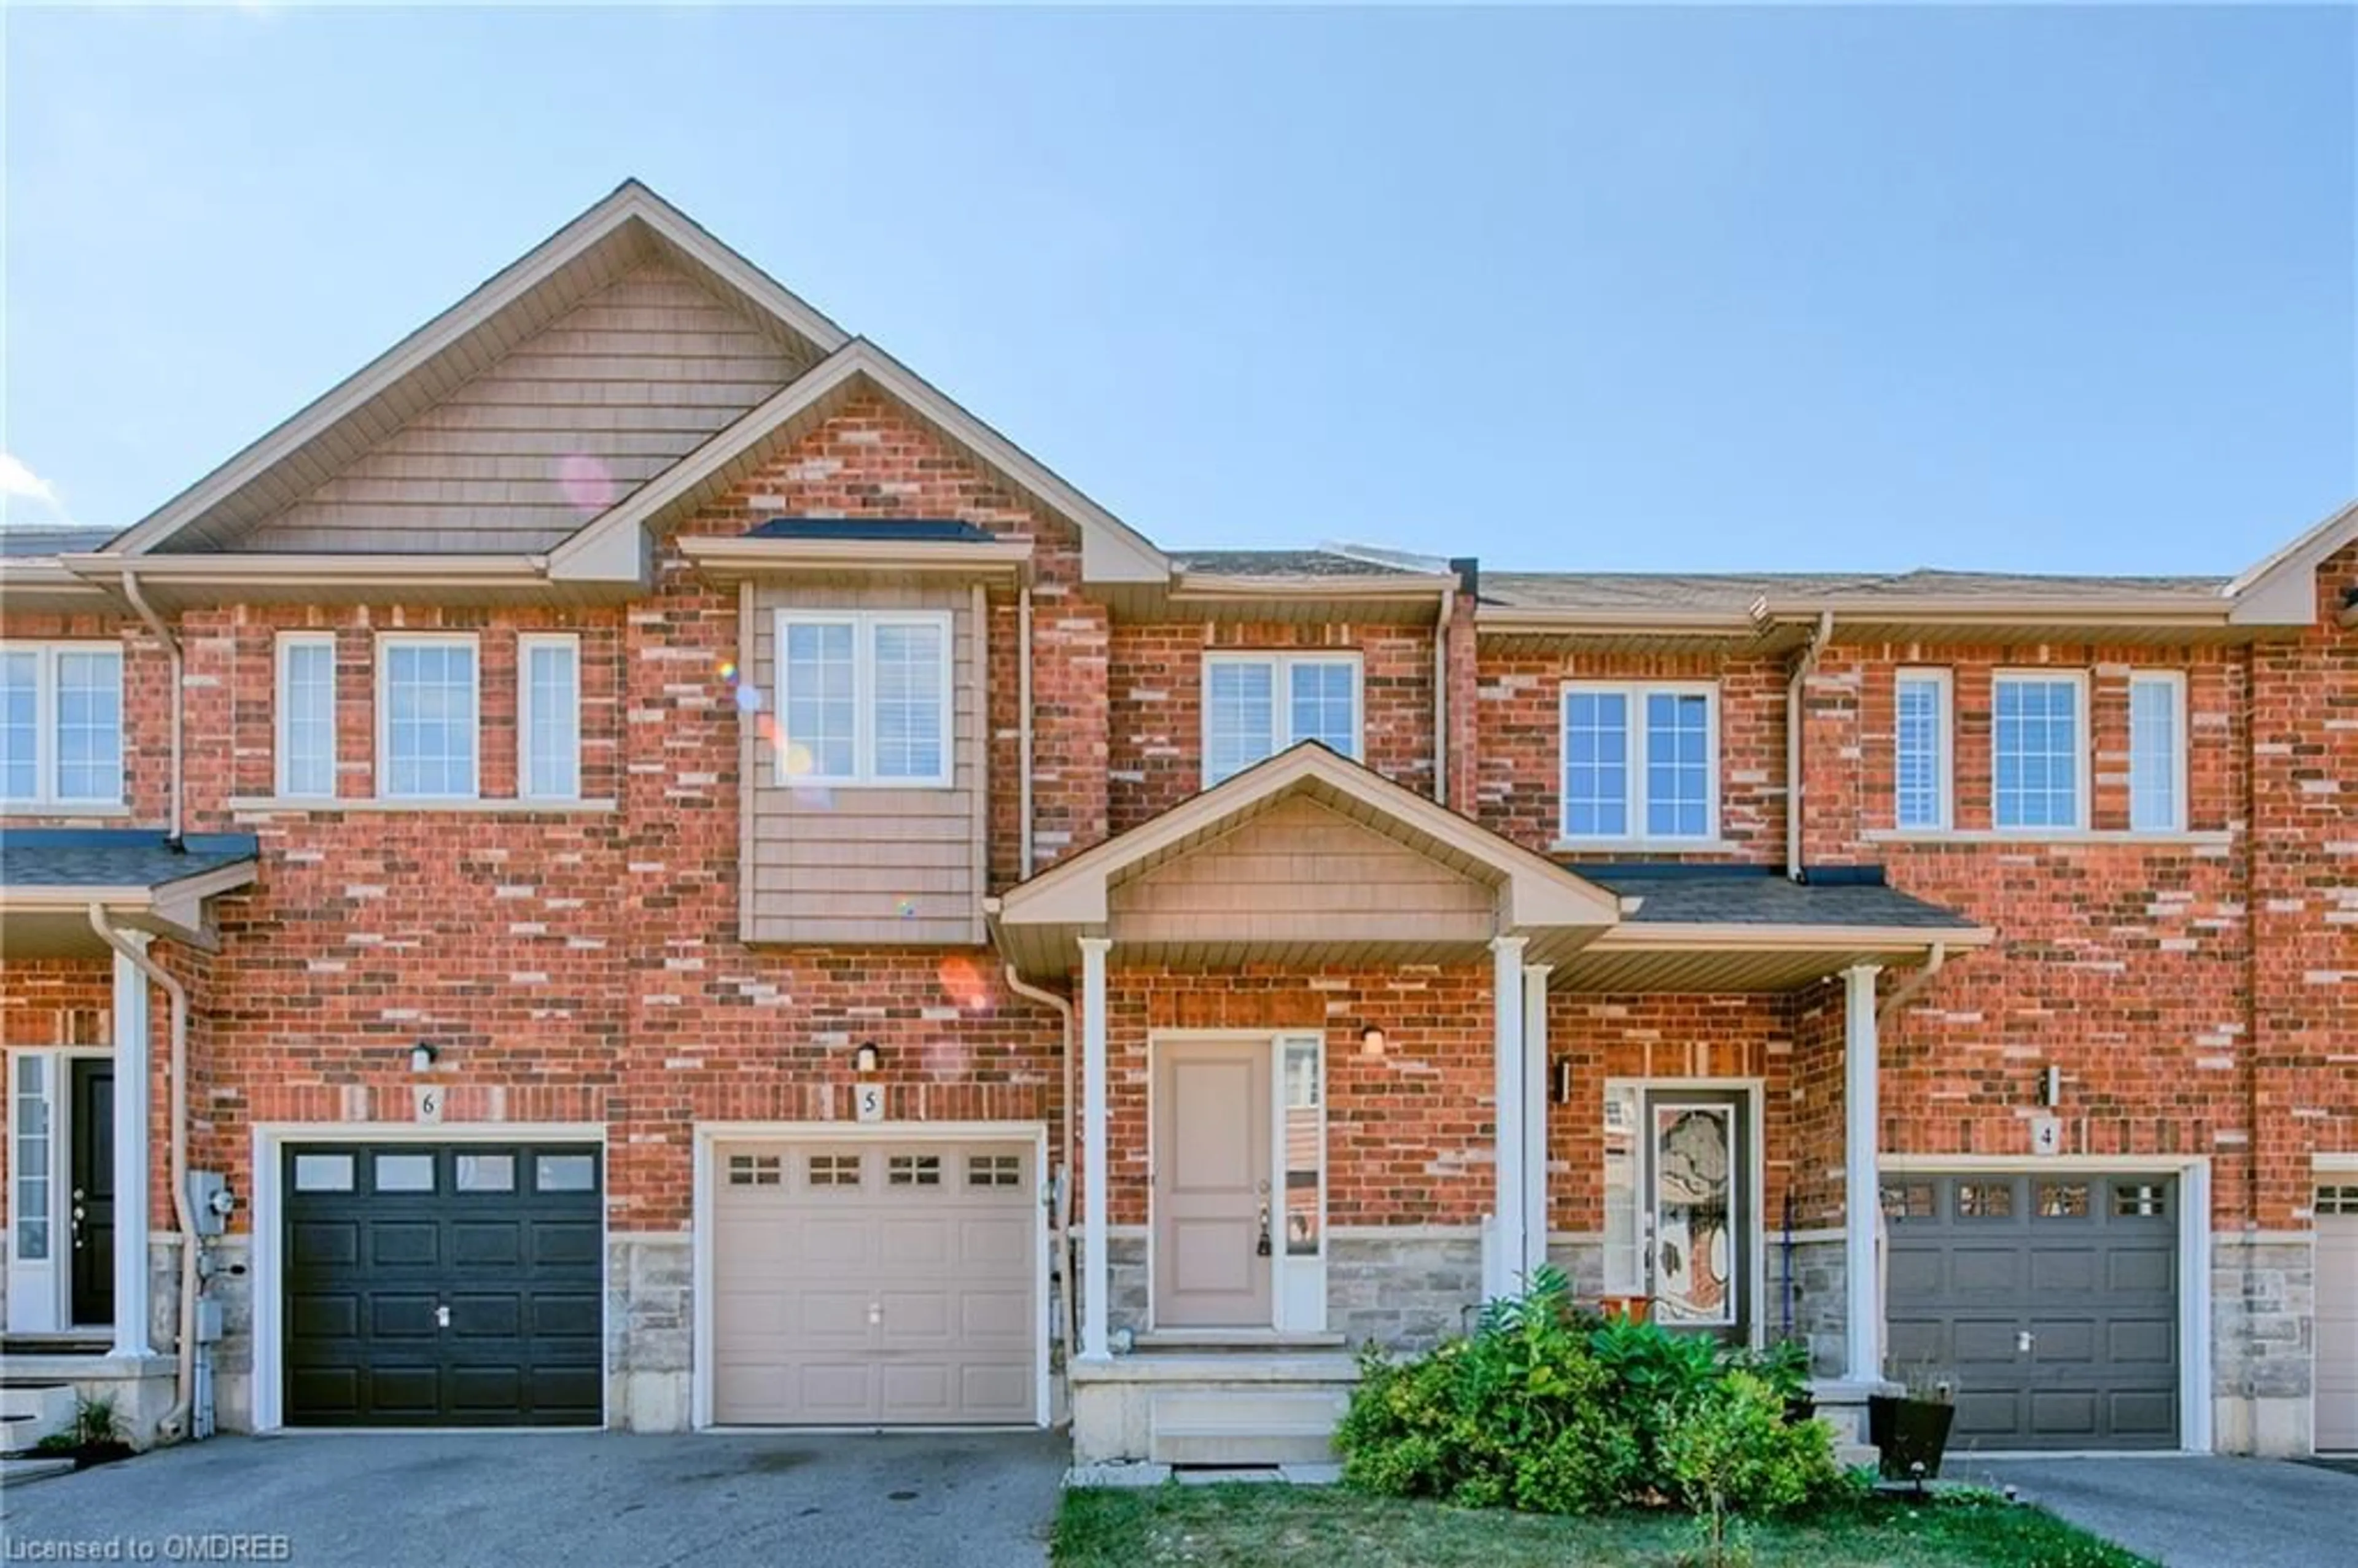 Home with brick exterior material for 45 Seabreeze Cres #5, Stoney Creek Ontario L8E 0G1